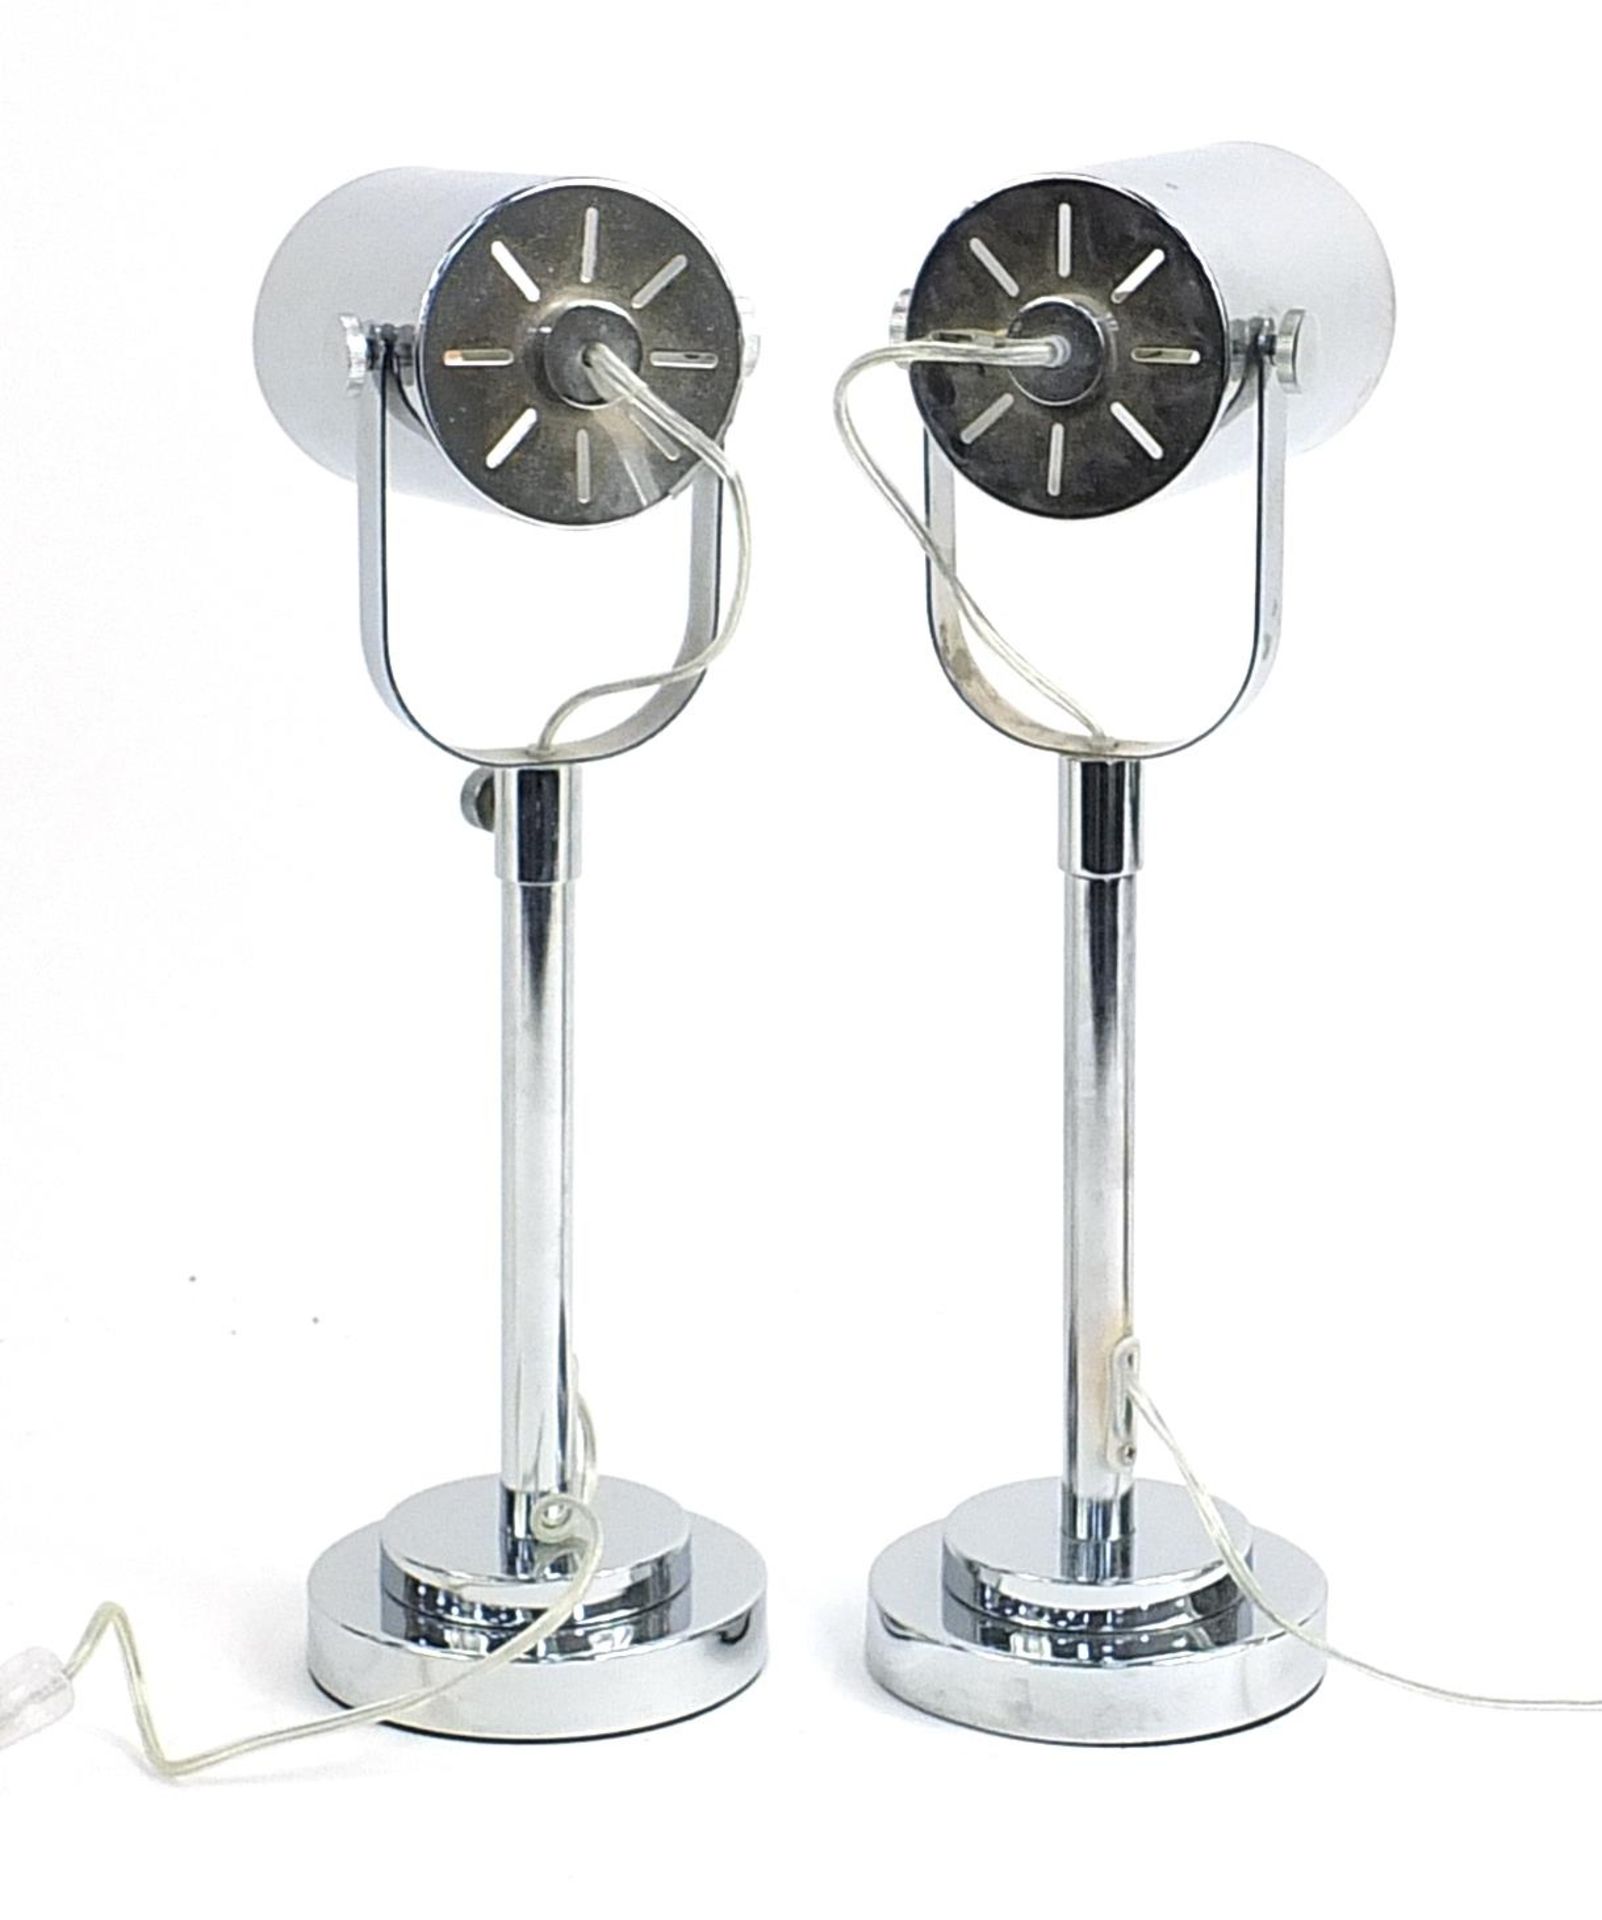 Pair of polished chrome theatre style table lamps, each 49cm high - Image 2 of 2